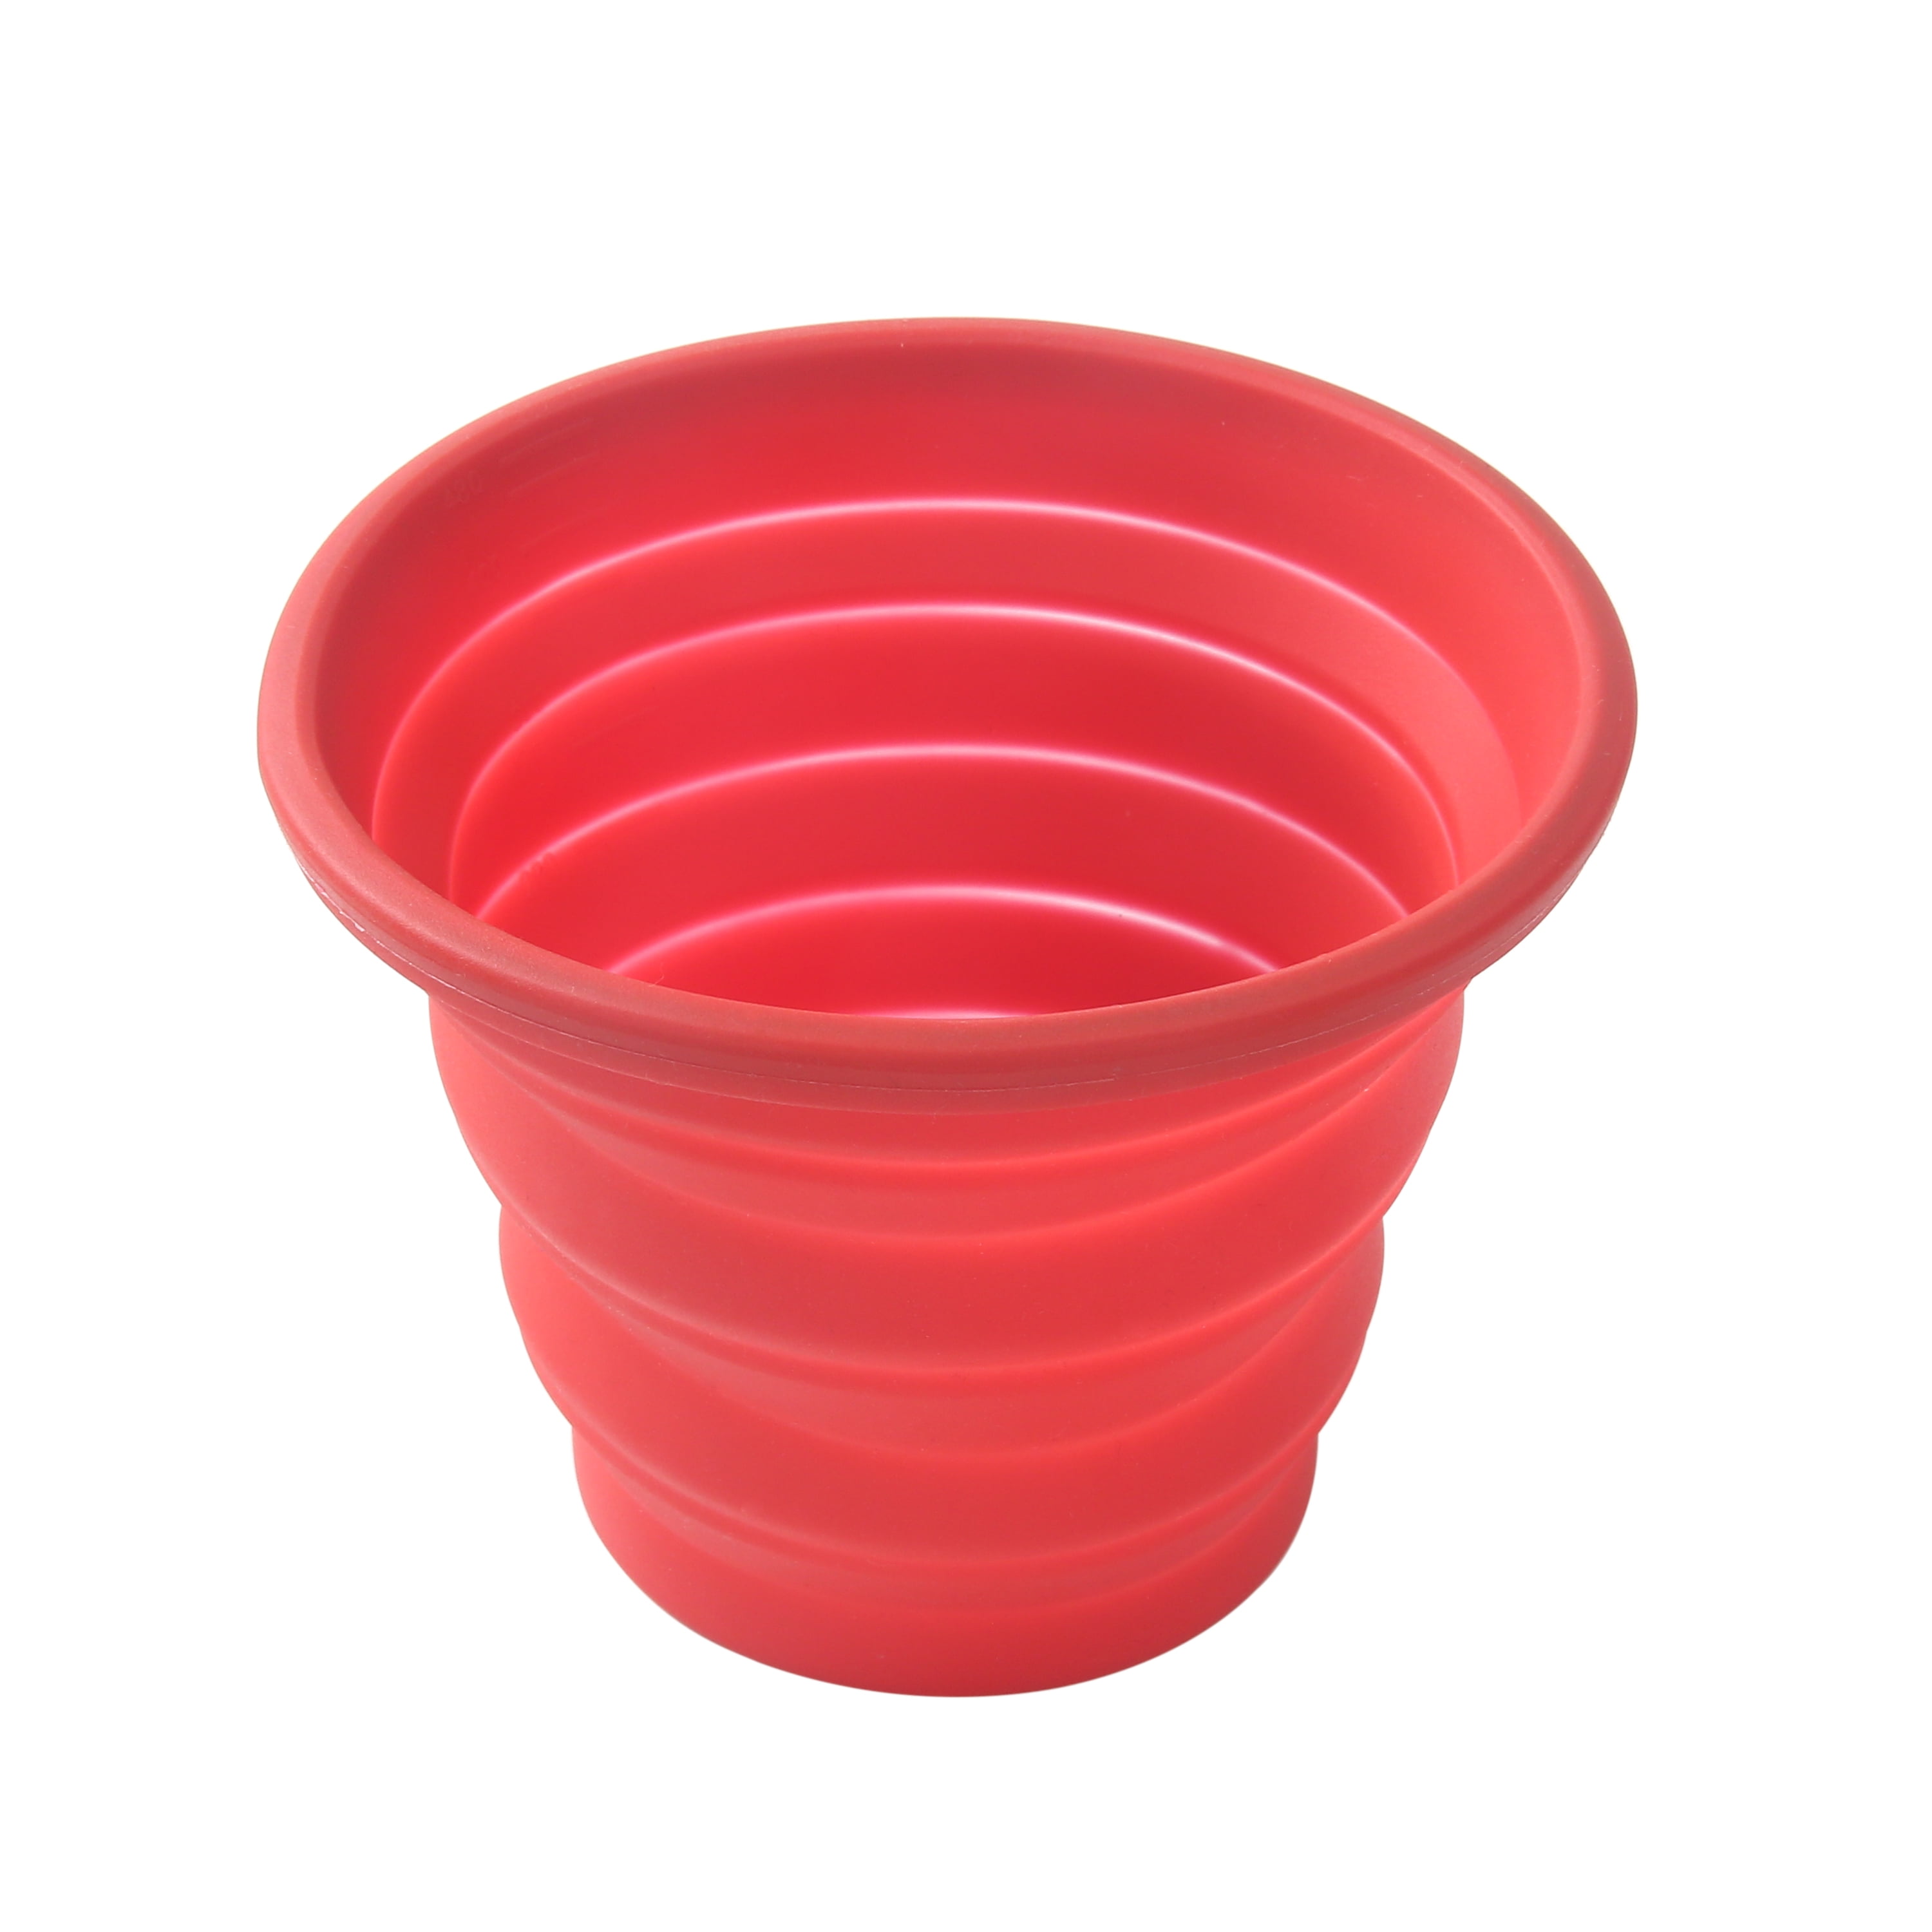 Collapsible Travel Bowls LIST (red) – Handmade in Germany